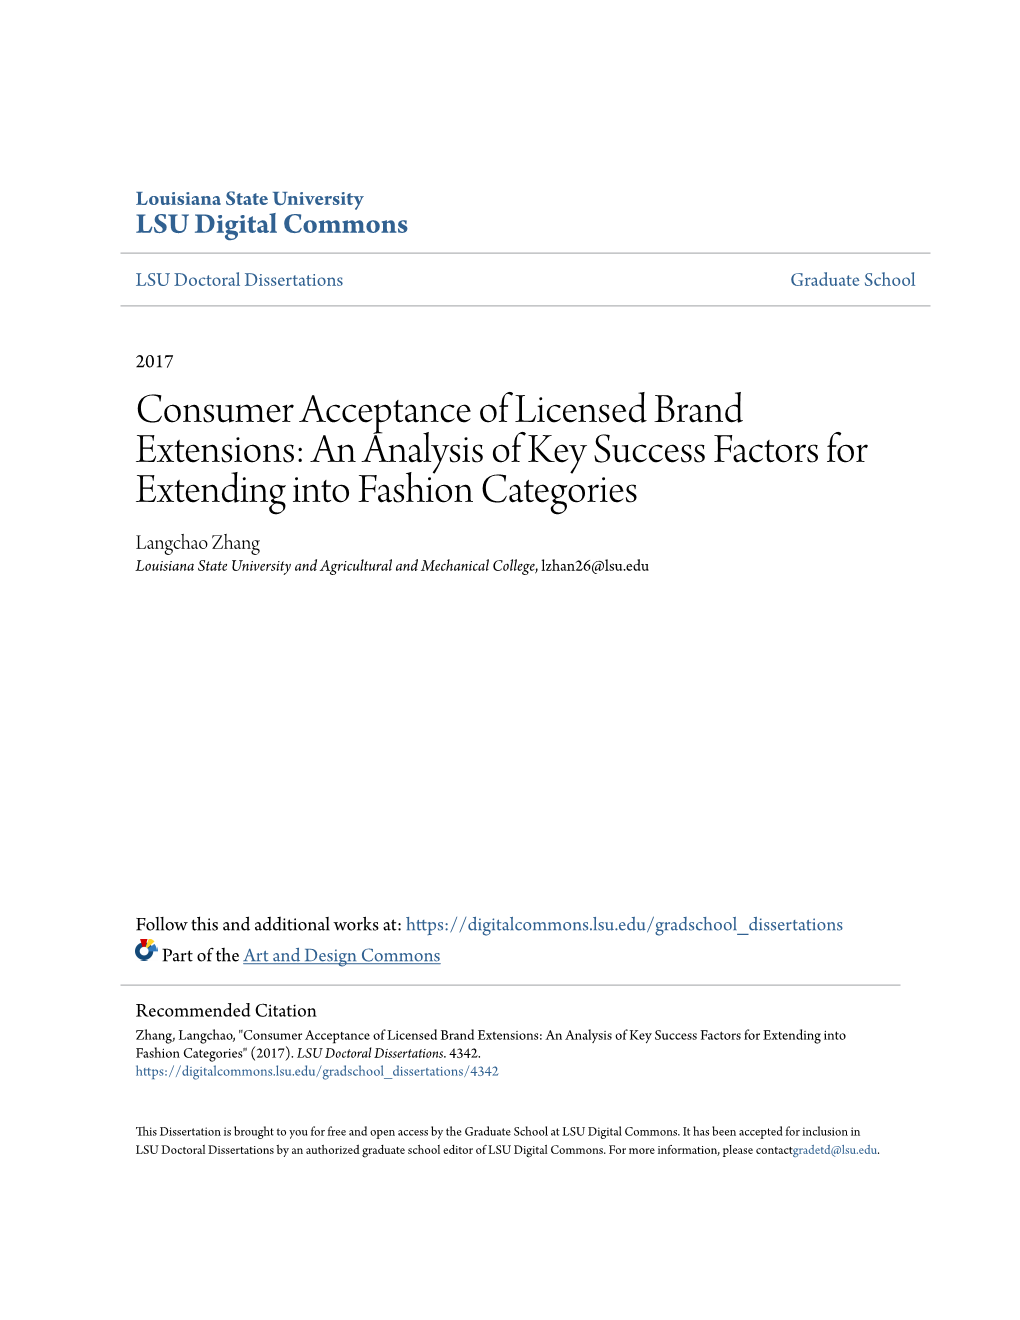 Consumer Acceptance of Licensed Brand Extensions